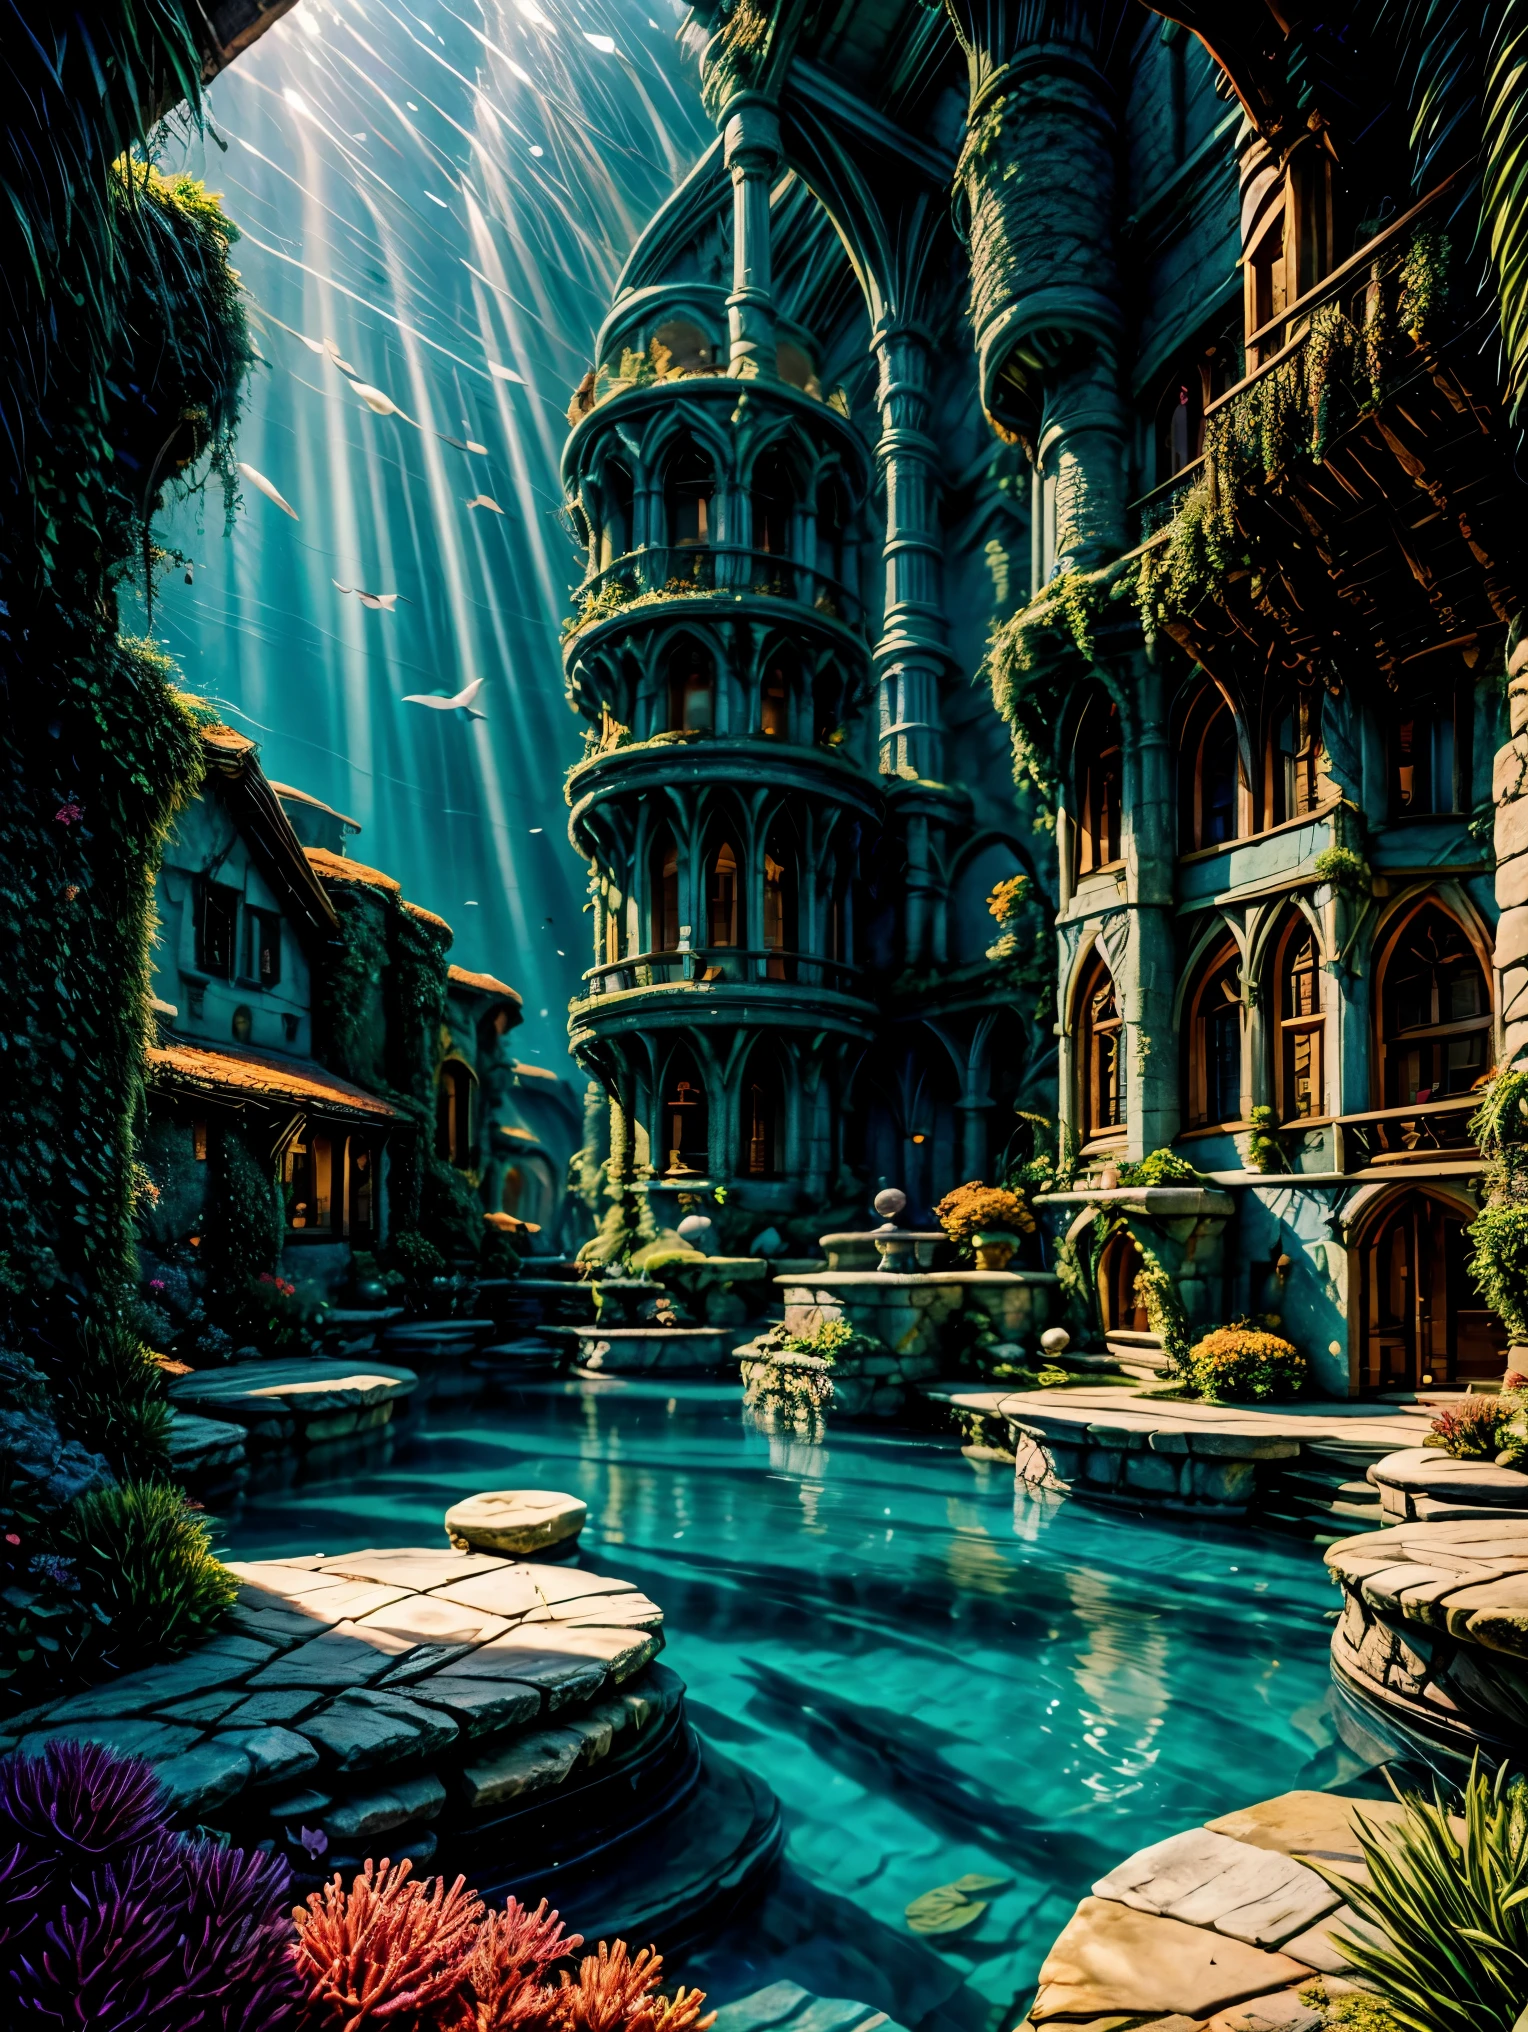 best quality,4k,8k,highres,masterpiece:1.2,ultra-detailed,realistic,photorealistic:1.37,underwater city,hidden civilization,glowing ruins,ancient architecture,coral reefs,aquatic plants,dazzling light rays,mythical creatures,secrets of the deep,lost treasure,captivating beauty,azure waters,ethereal atmosphere,colorful marine life,majestic structures,diving adventures,mesmerizing landscapes,submerged statues,sunken ships,enchanted atmosphere,dreamlike surroundings,mysterious civilizations,subaquatic exploration,serene ambiance,forgotten history,surreal experience,otherworldly paradise,luminous sculptures,serenity and tranquility,shimmering reflections,wonder and awe,majestic underwater palaces